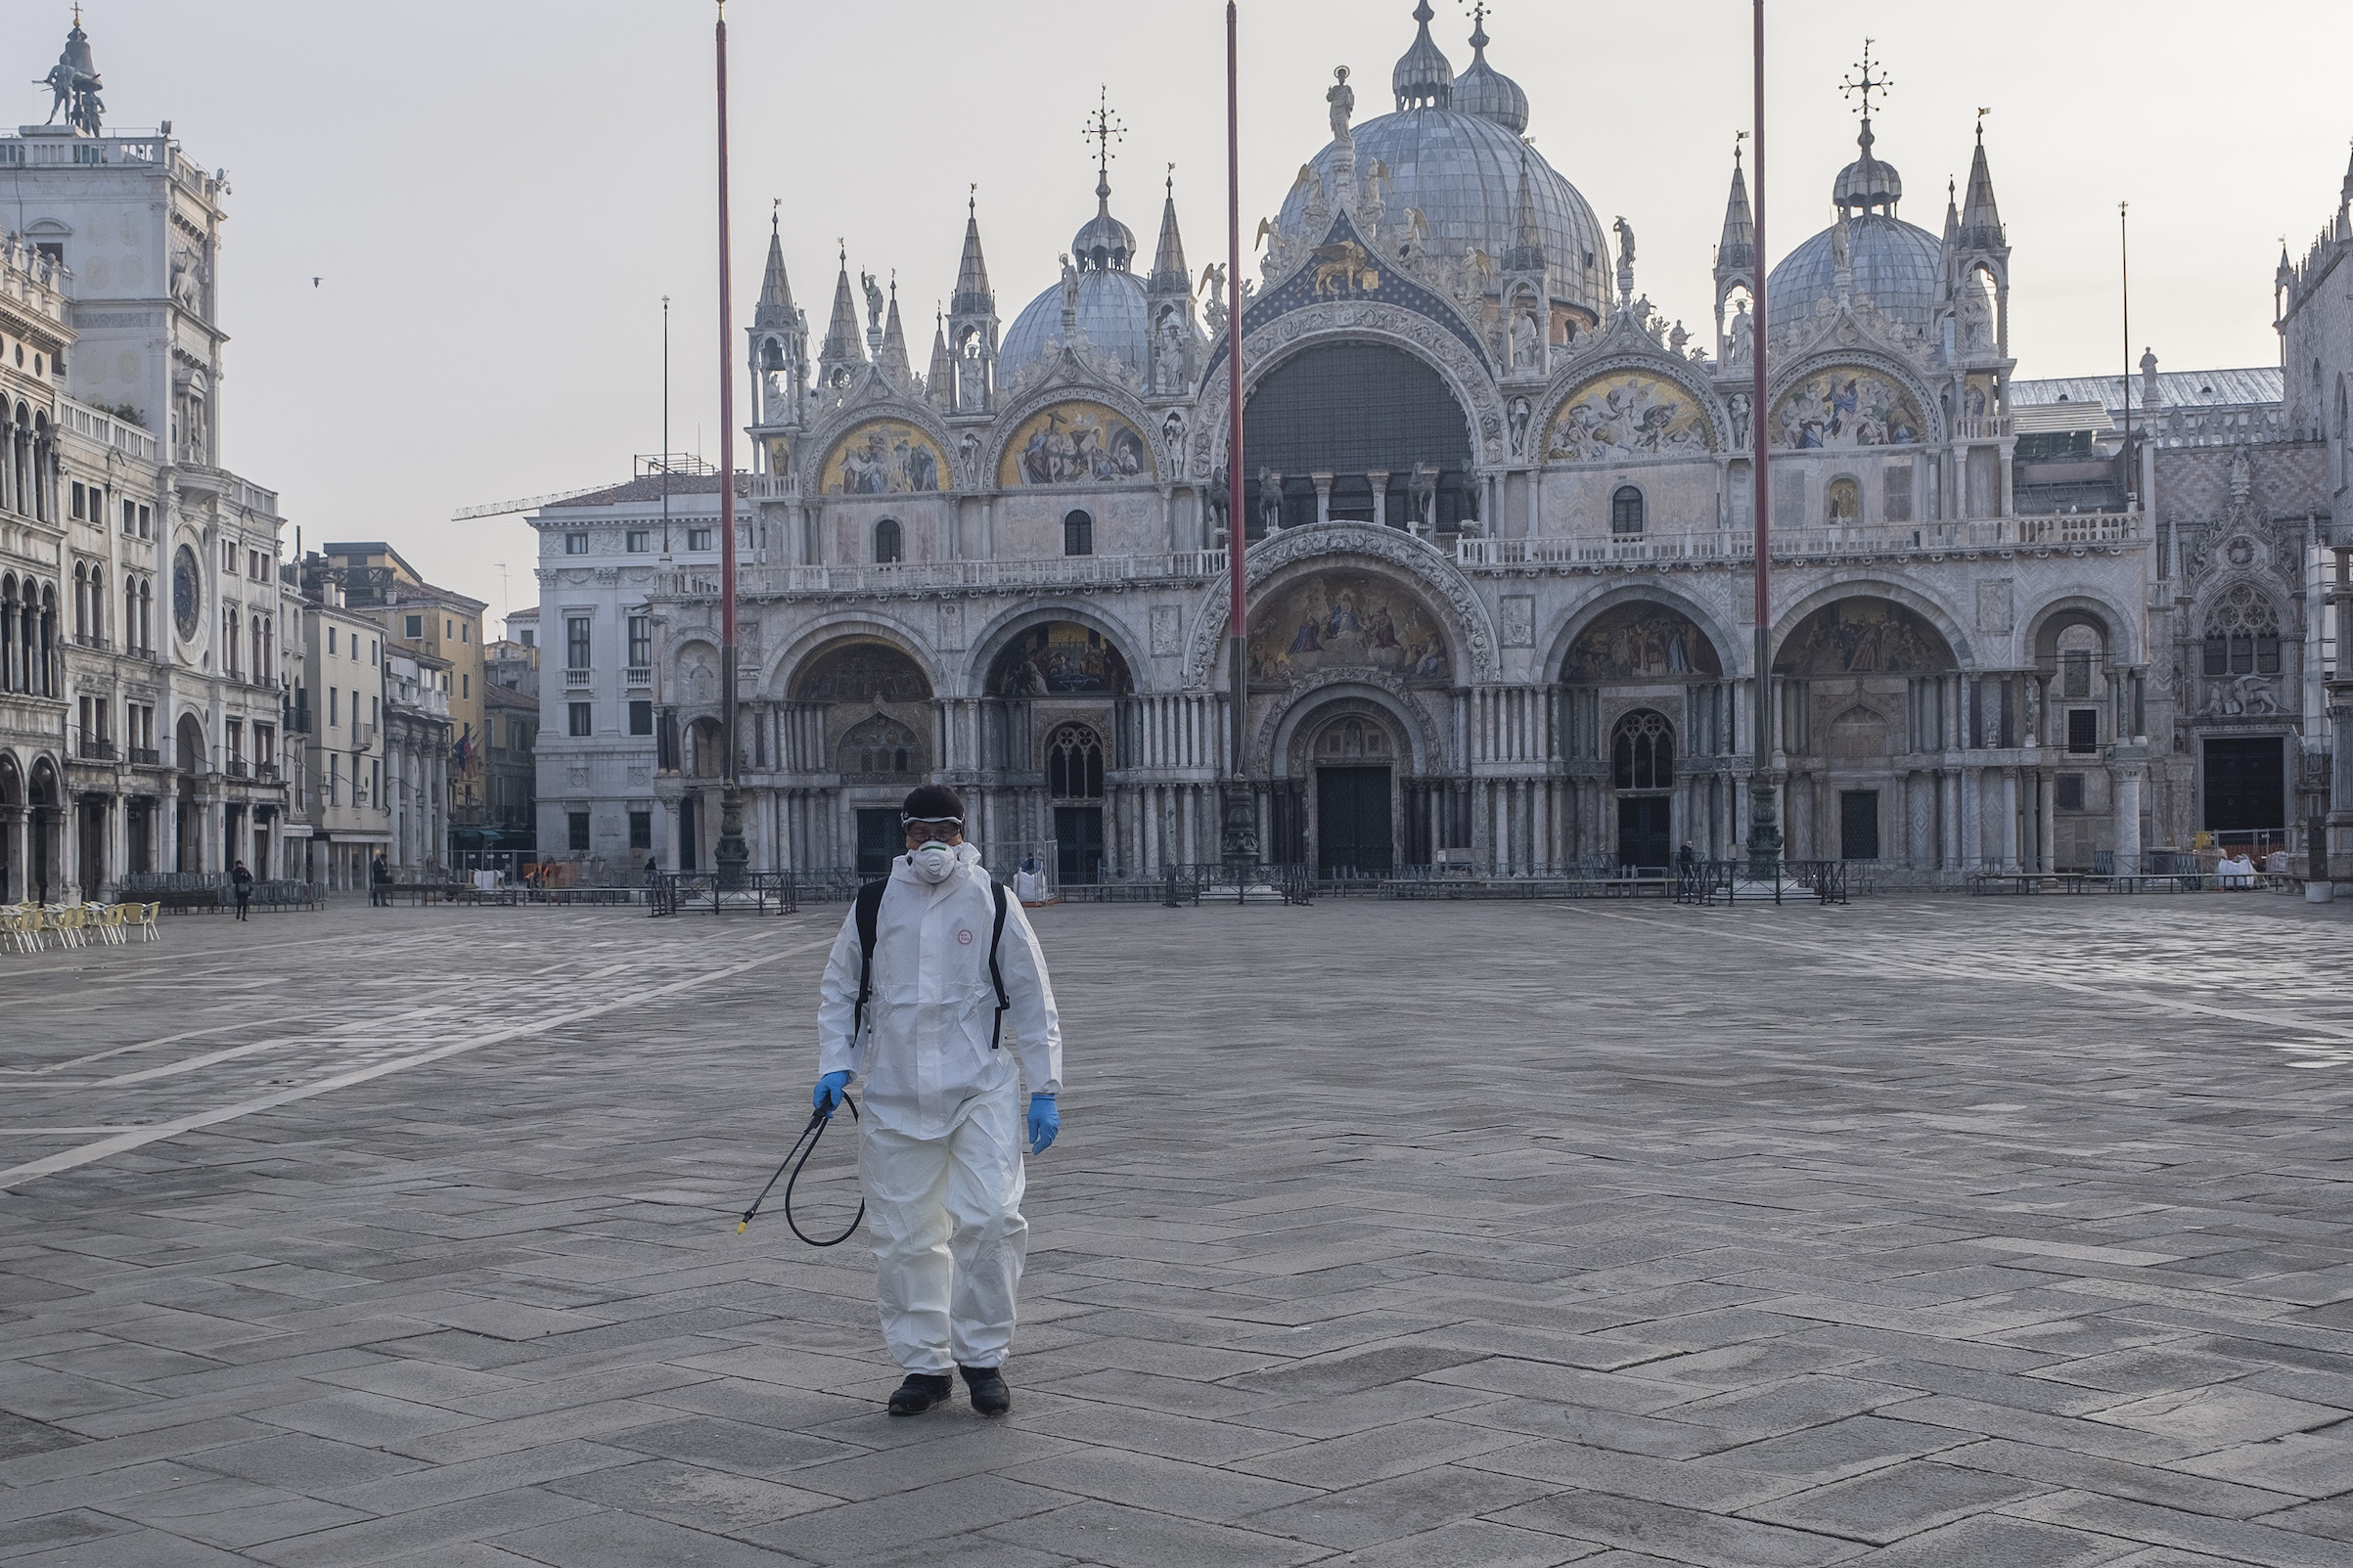 Italy Clamps Down On Public Events And Travel To Halt Spread Of Coronavirus